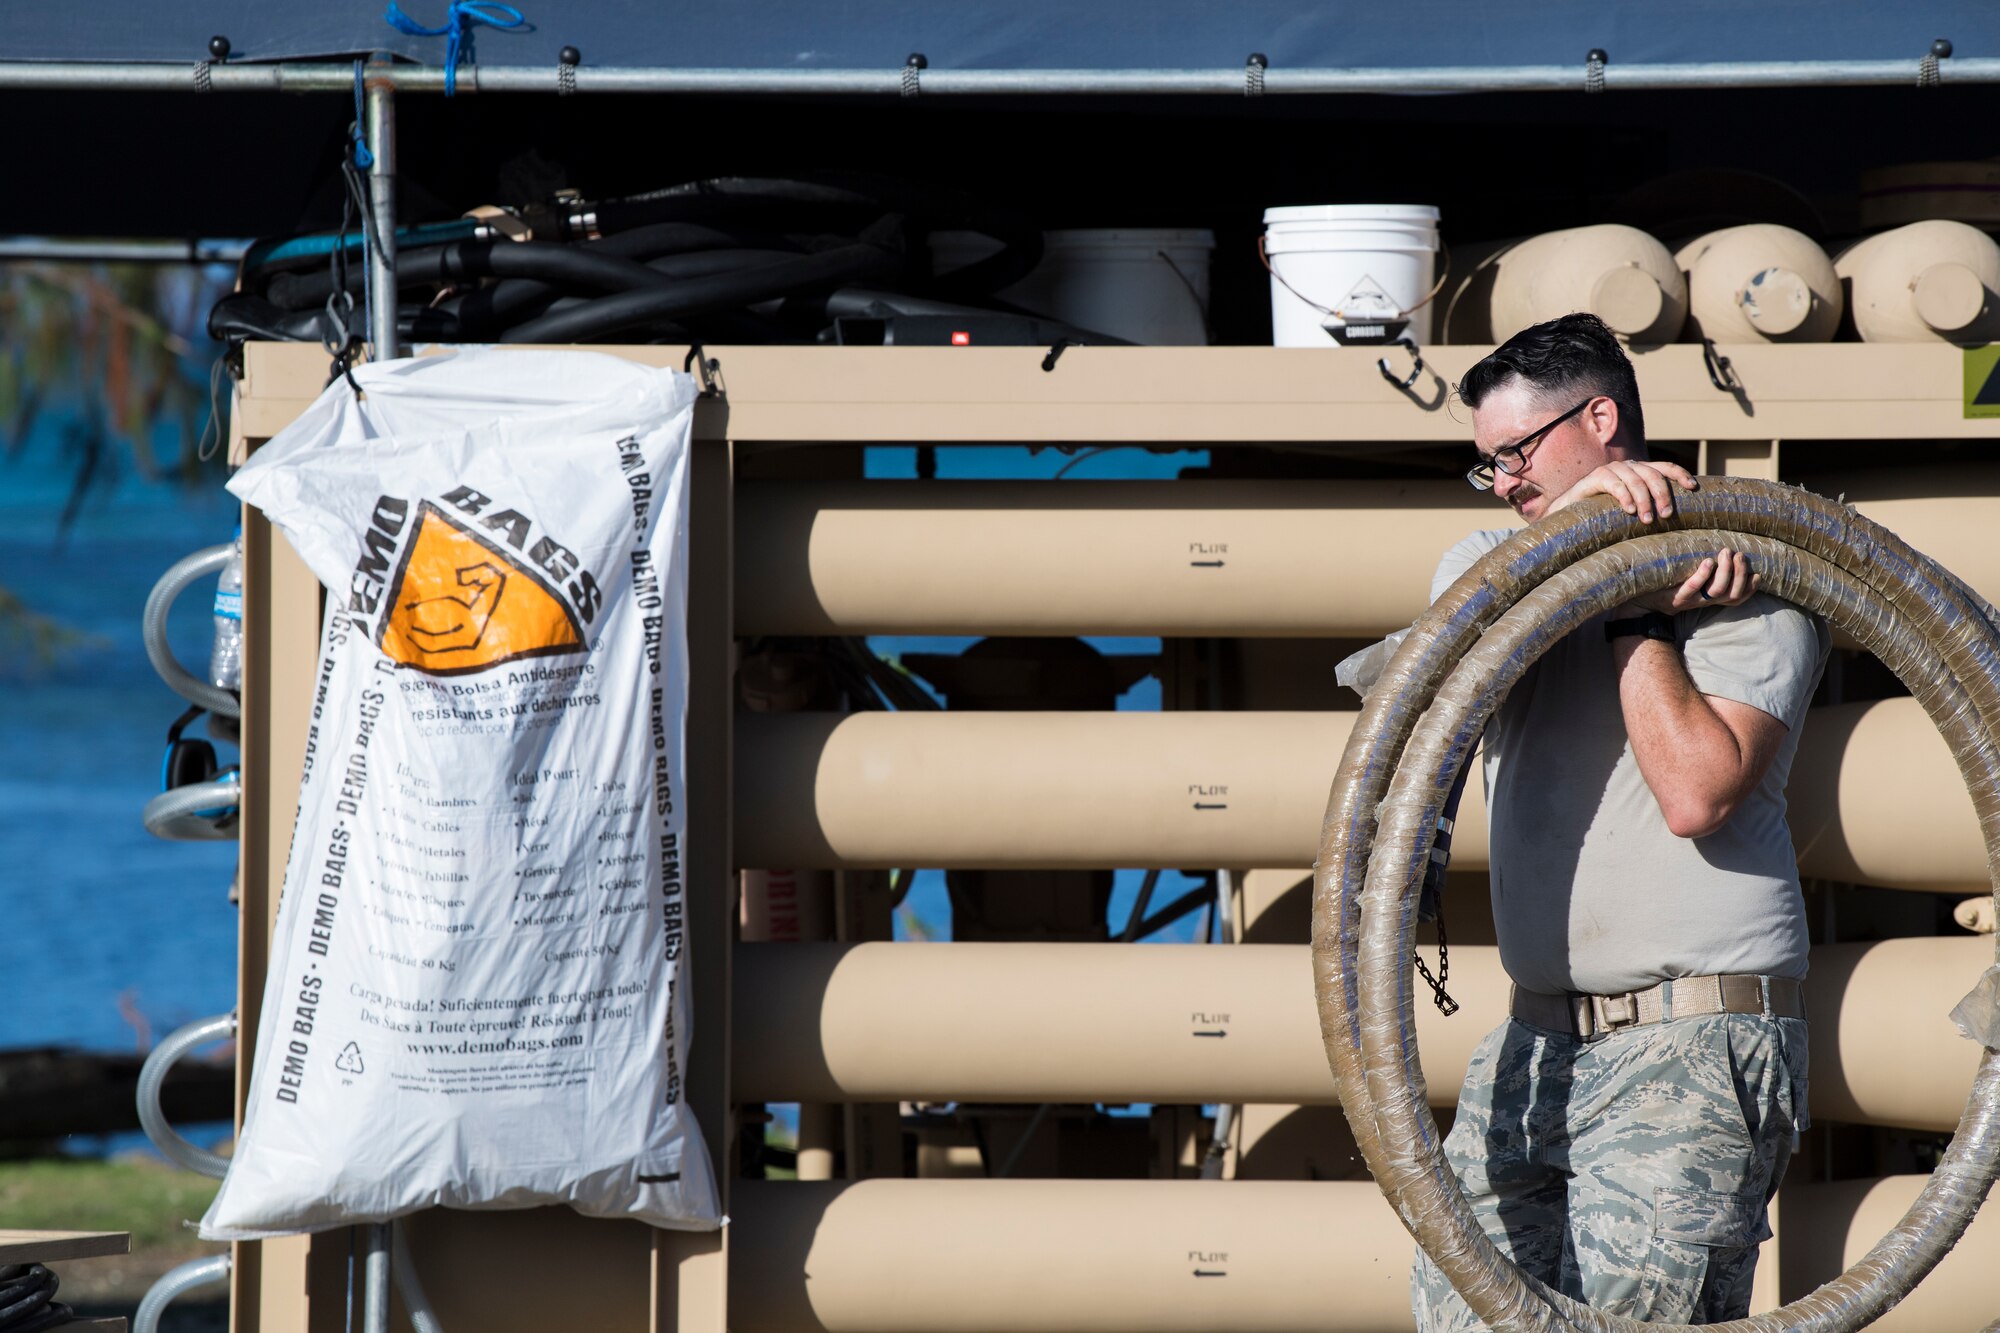 Senior Airman John McGovney, 36th Civil Engineer Squadron water and fuel systems maintainer assigned to Andersen Air Base, Guam, carries a hose during reverse osmosis water purification unit tear down on Saipan, Commonwealth of the Northern Mariana Islands, Nov. 21, 2018, as part of the Super Typhoon Yutu relief effort.